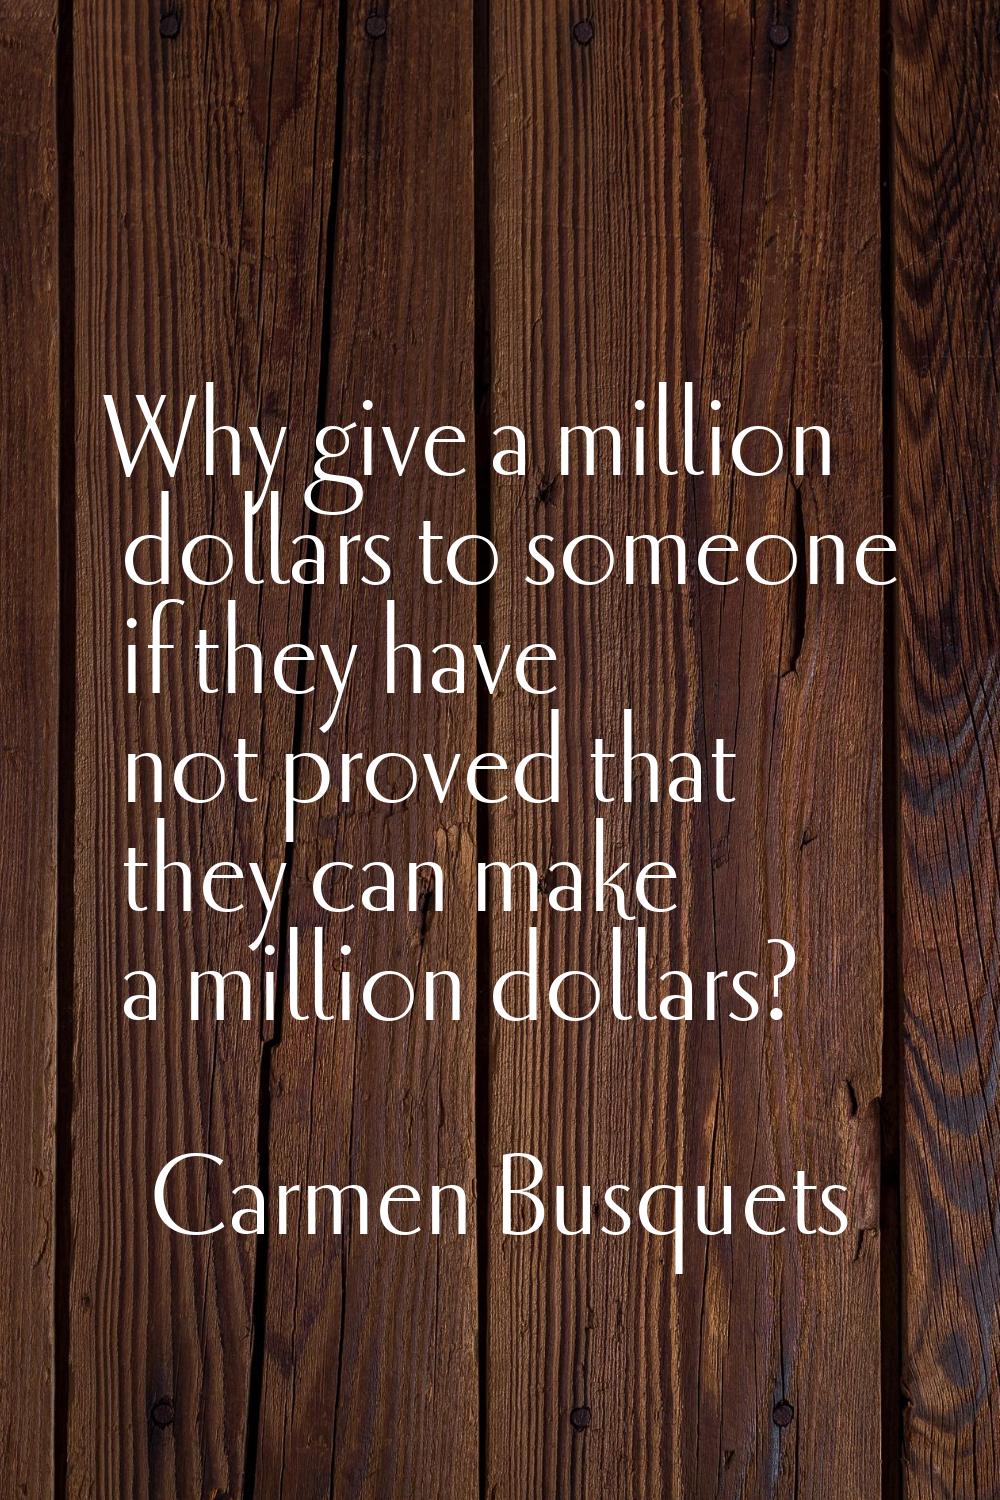 Why give a million dollars to someone if they have not proved that they can make a million dollars?